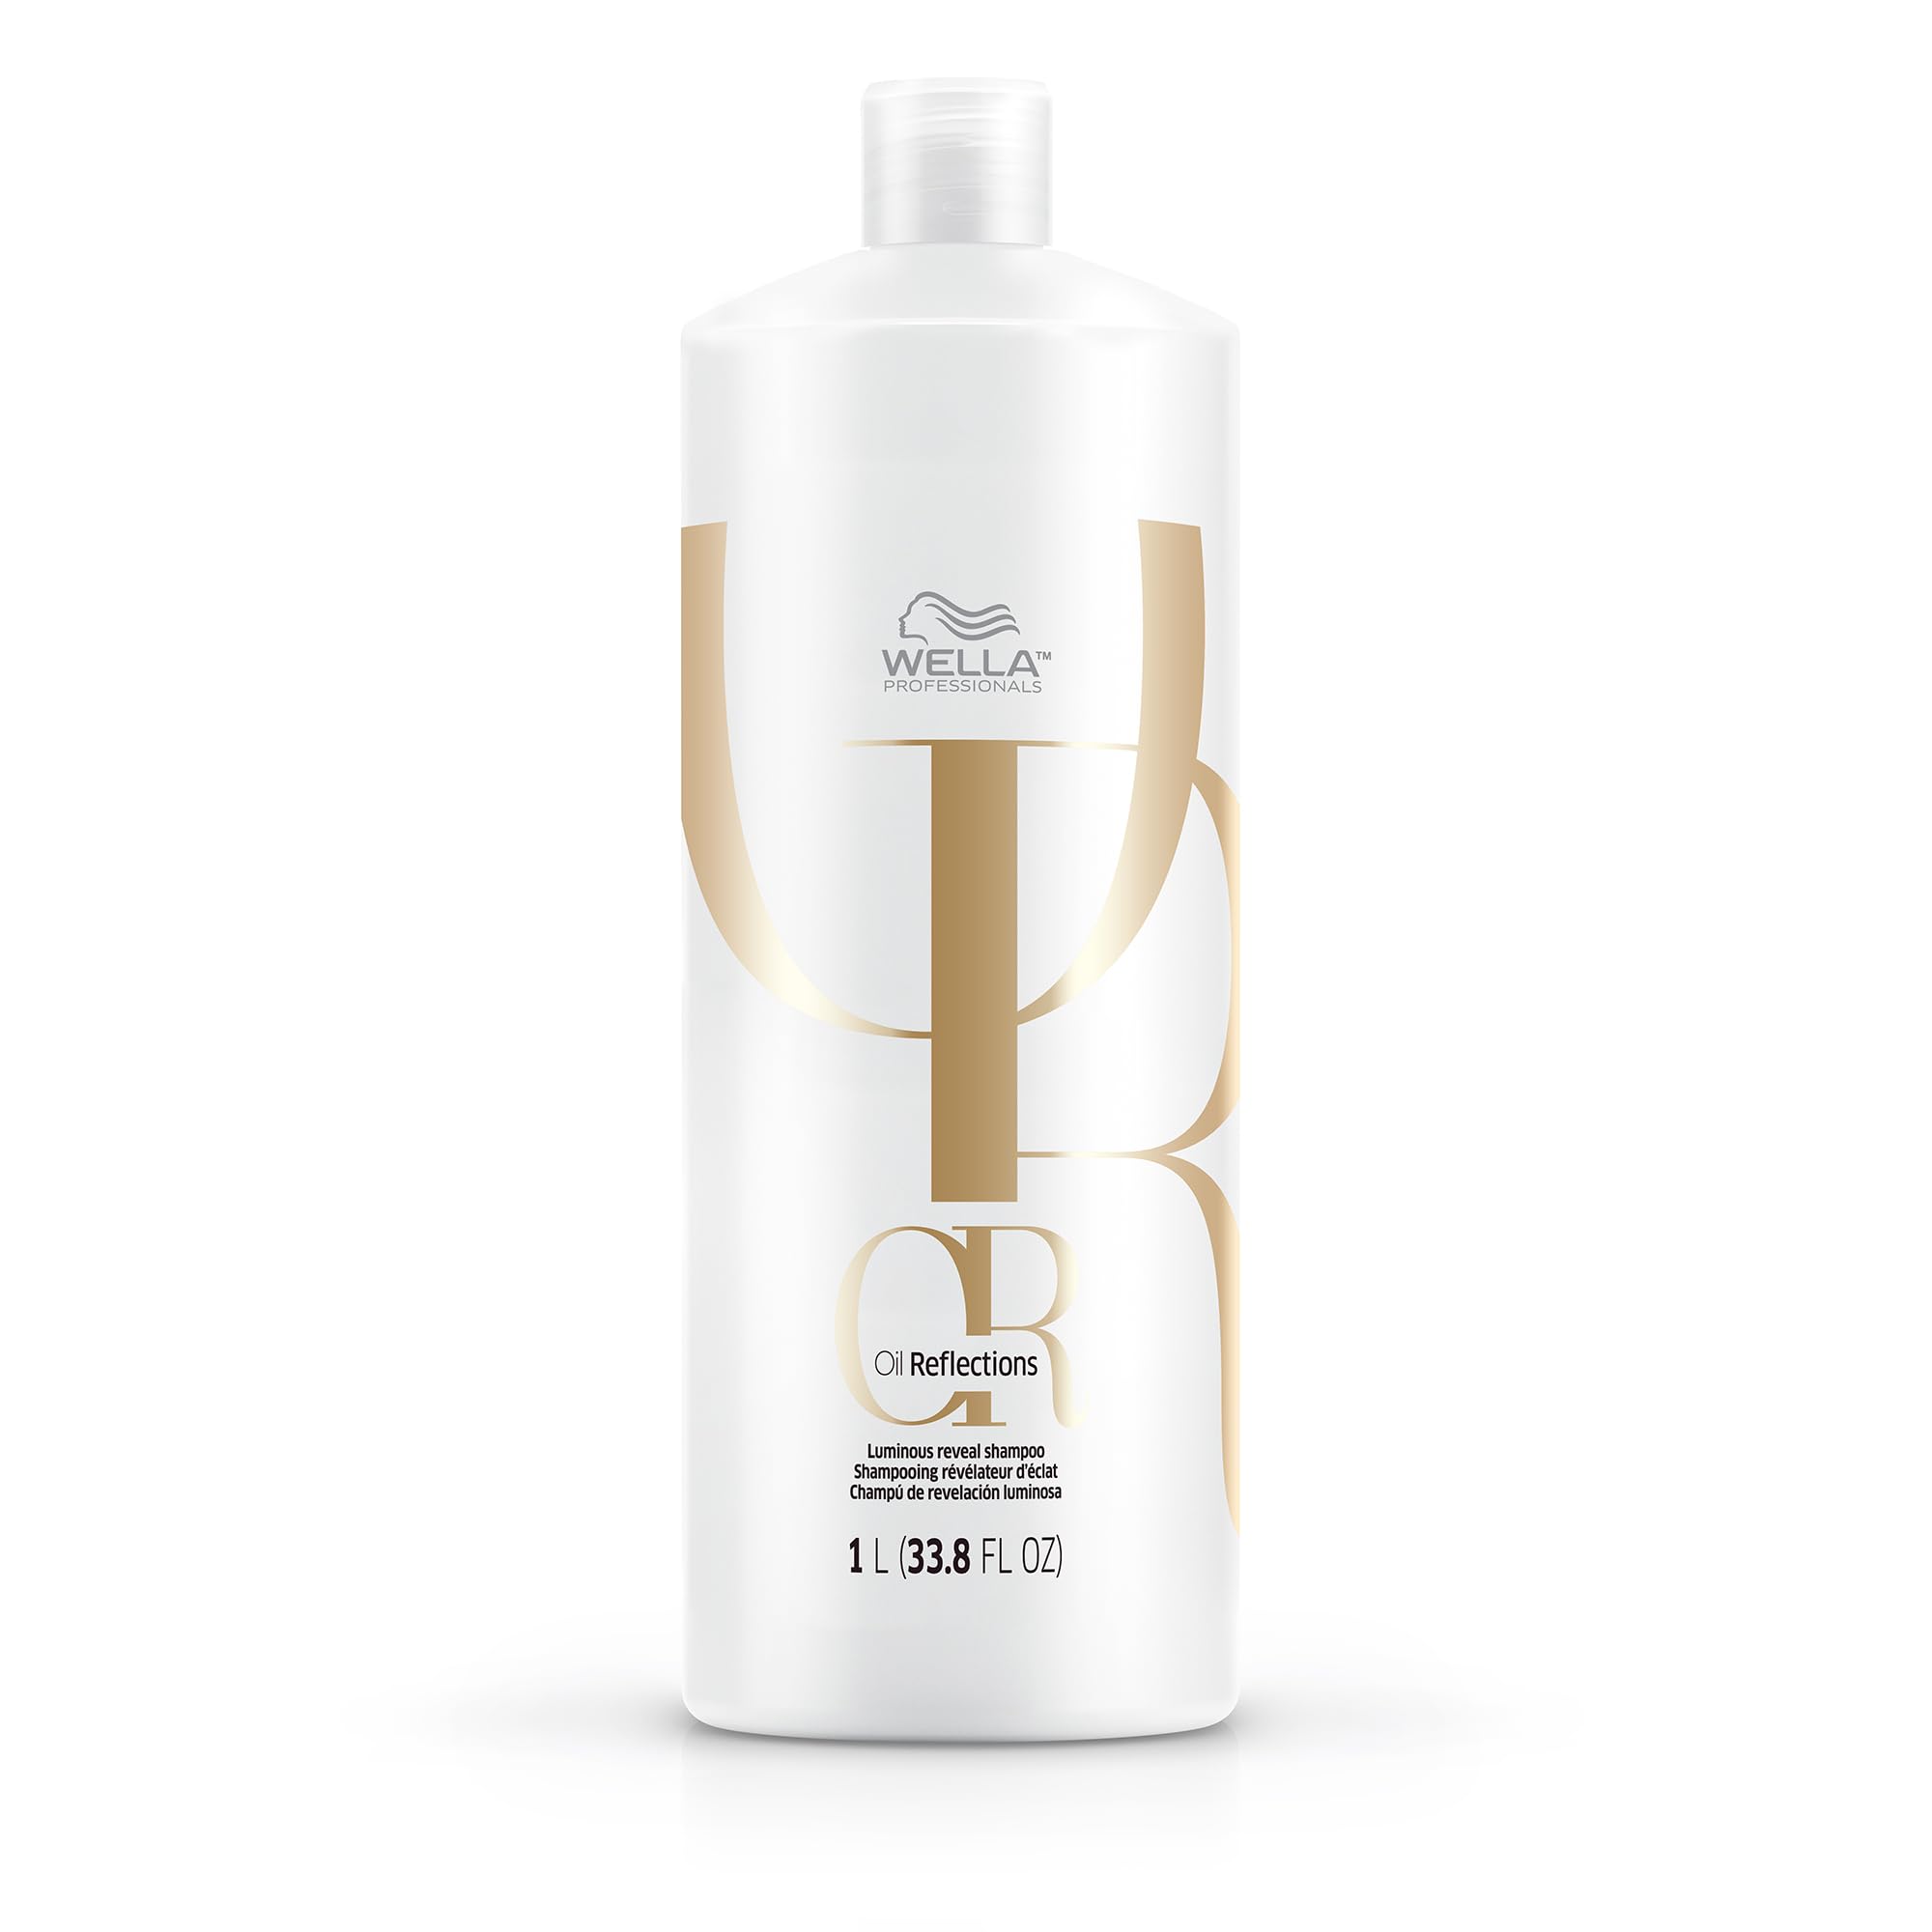 WELLA PROFESSIONALS Oil Reflections Luminous Reveal Shampoo, With Natural Botanicals, Camellia Oil and White Tea Extract, For long-Lasting Softness and Shine, 33.8oz